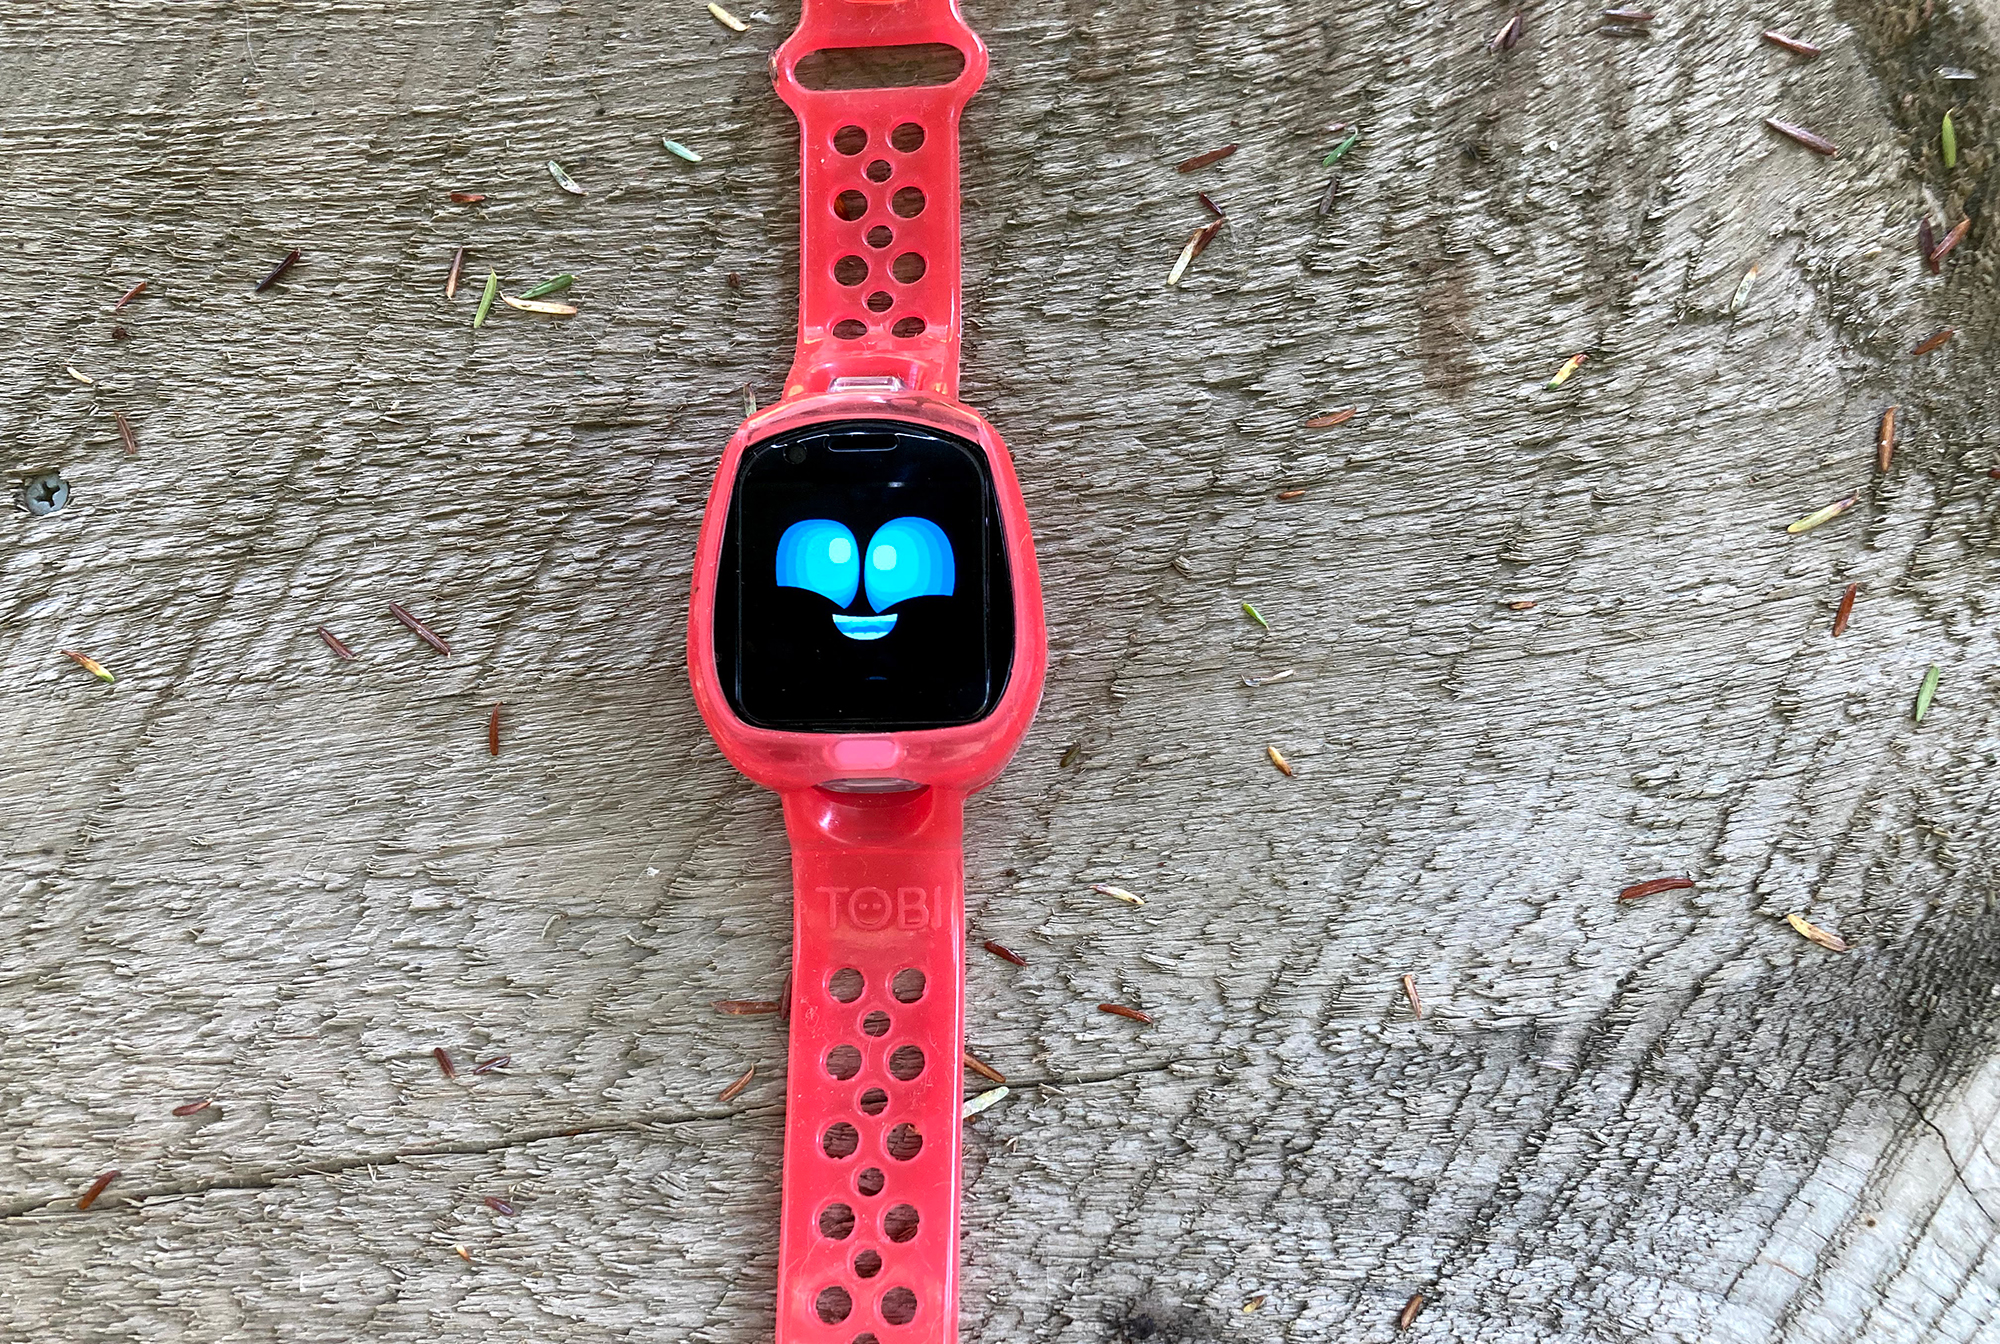 Tobi 2 Robot Smartwatch review: A kids’ device that brings its game face